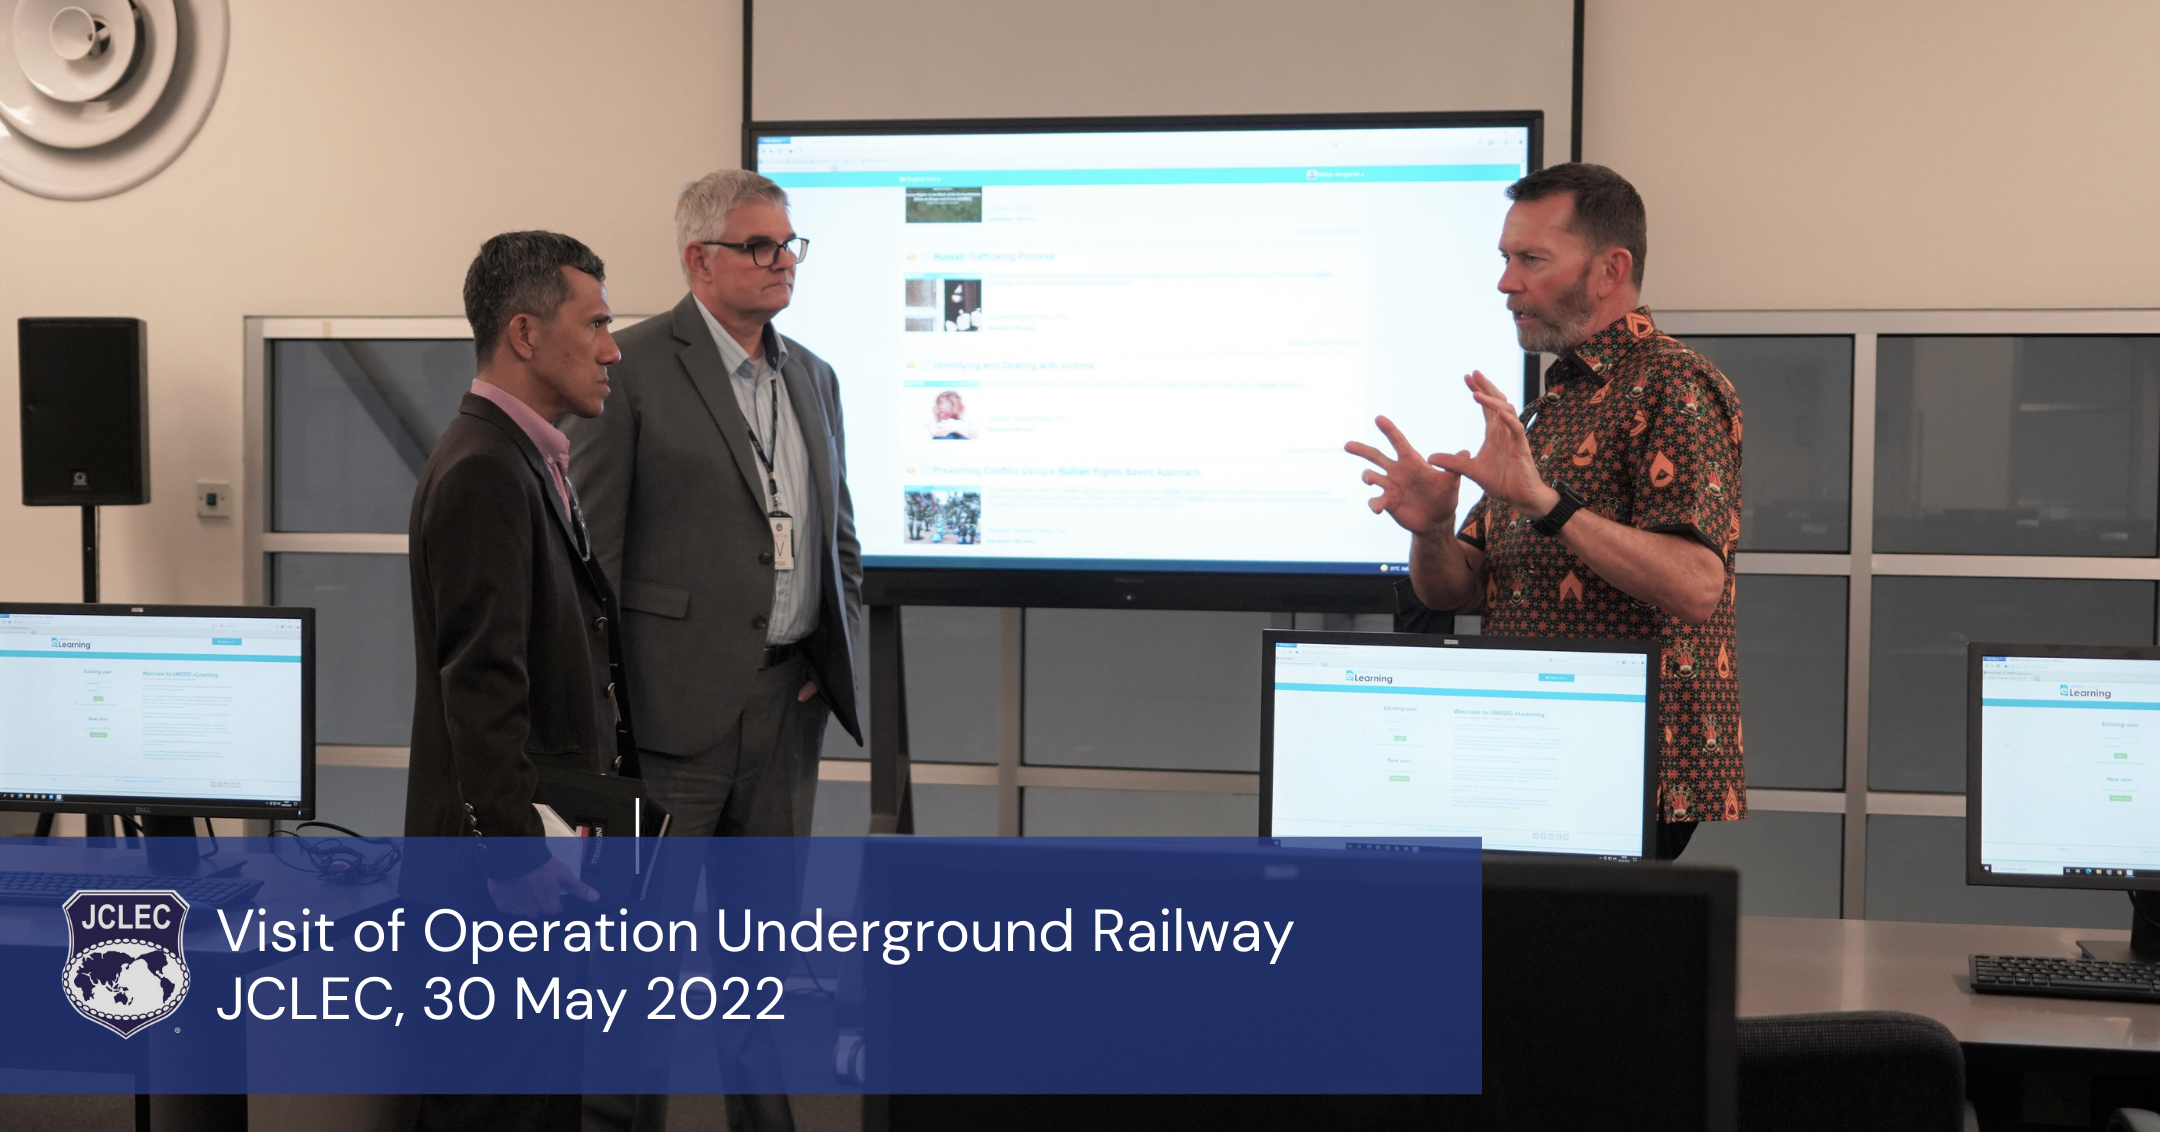 JCLEC's Executive Director Programs gave presentation to Operation Underground Railway delegations.